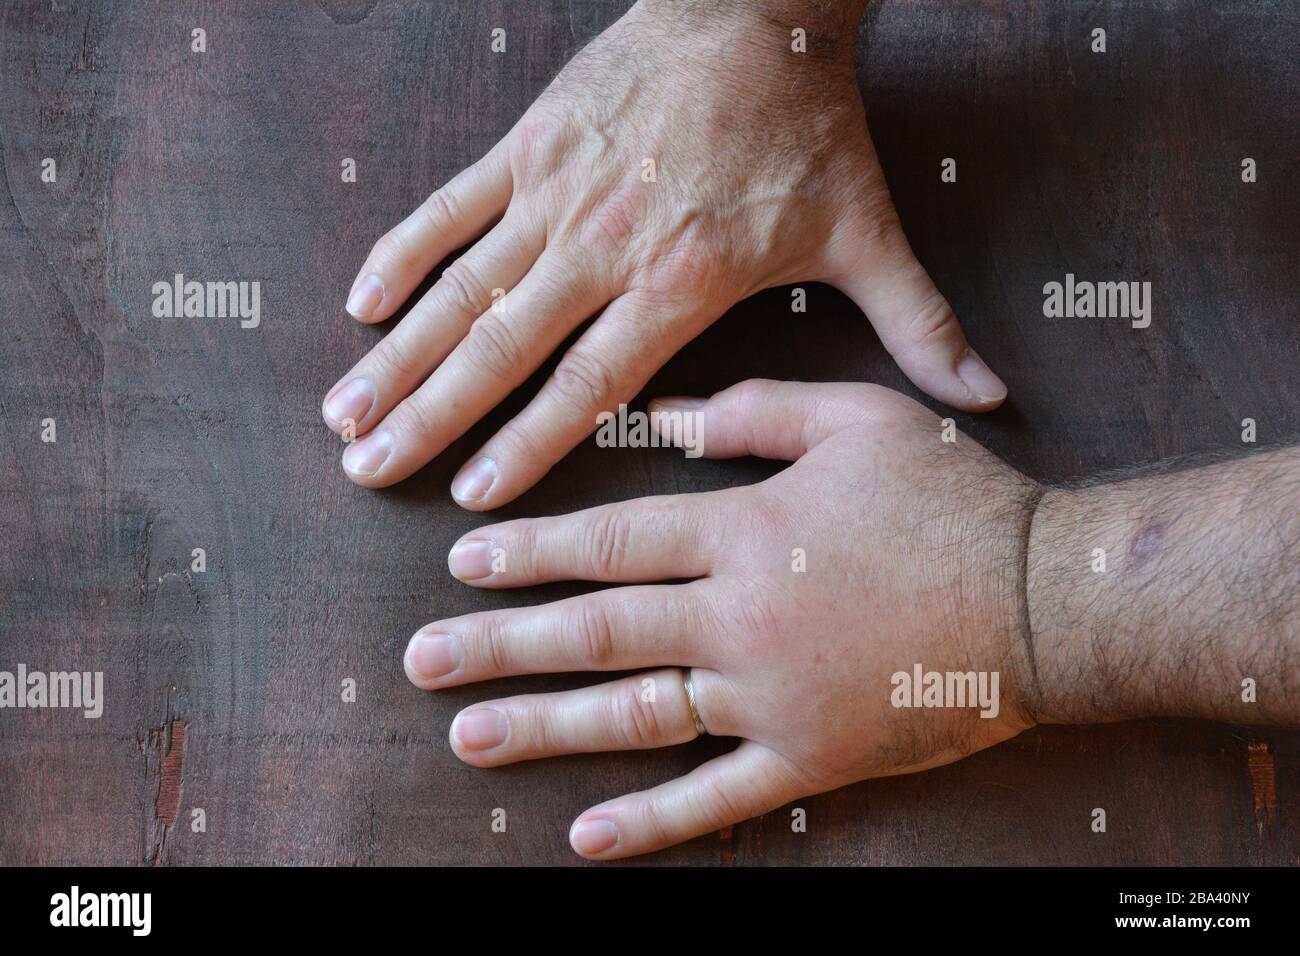 A swollen fist from a sting of a wasp compared to a healthy fist over dark wooden background Stock Photo